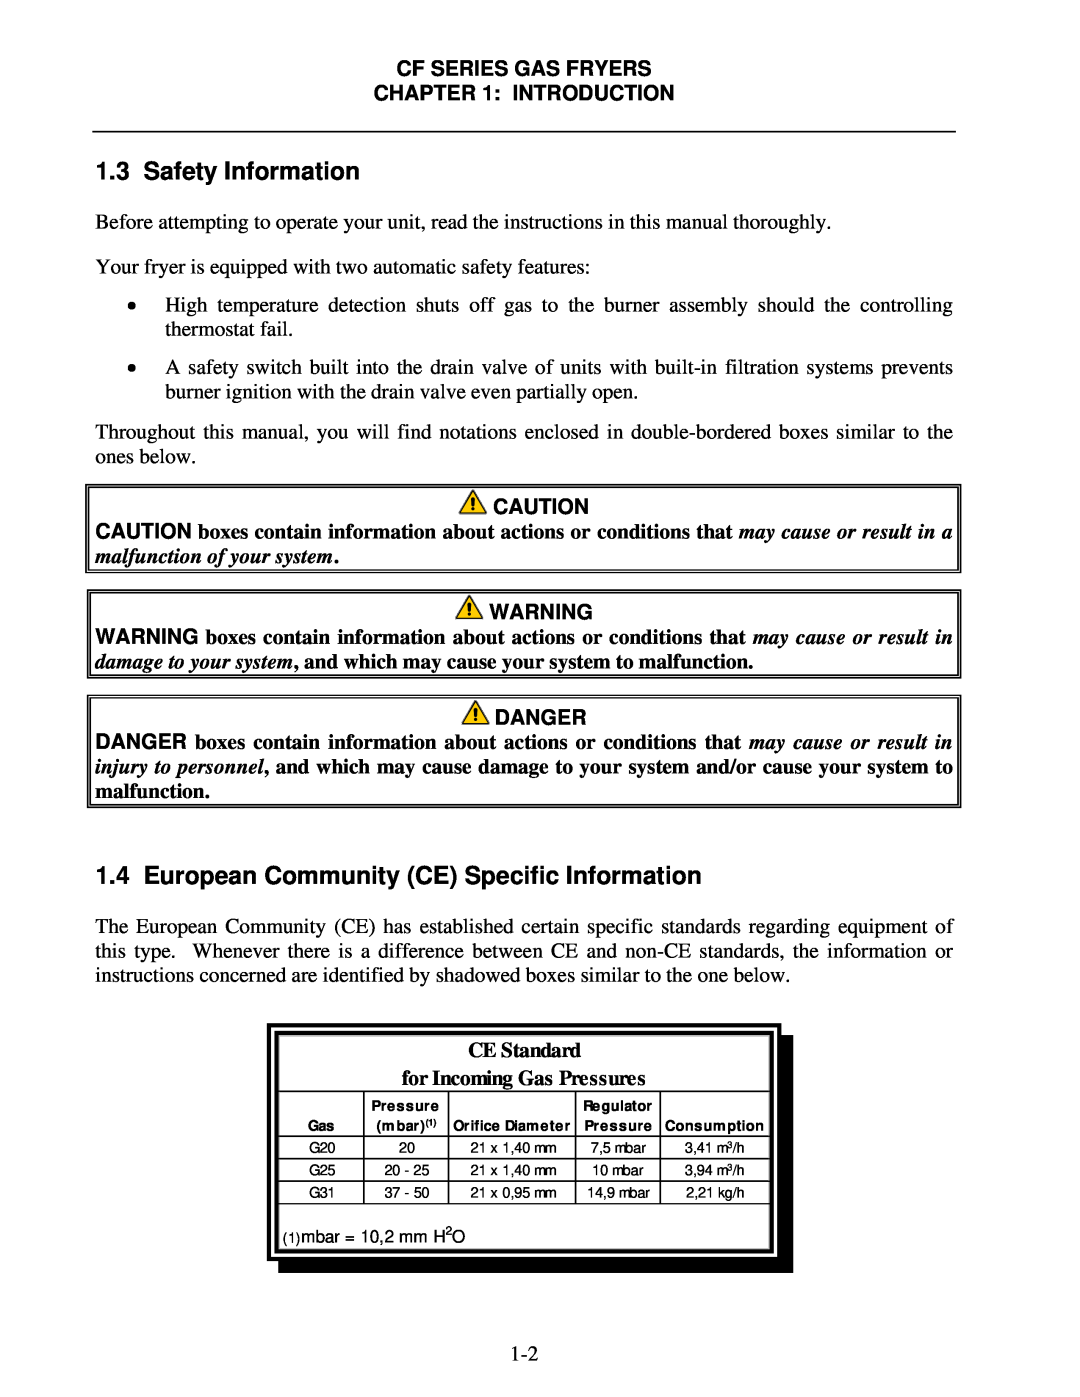 Frymaster CF Series Safety Information, European Community CE Specific Information, CE Standard for Incoming Gas Pressures 